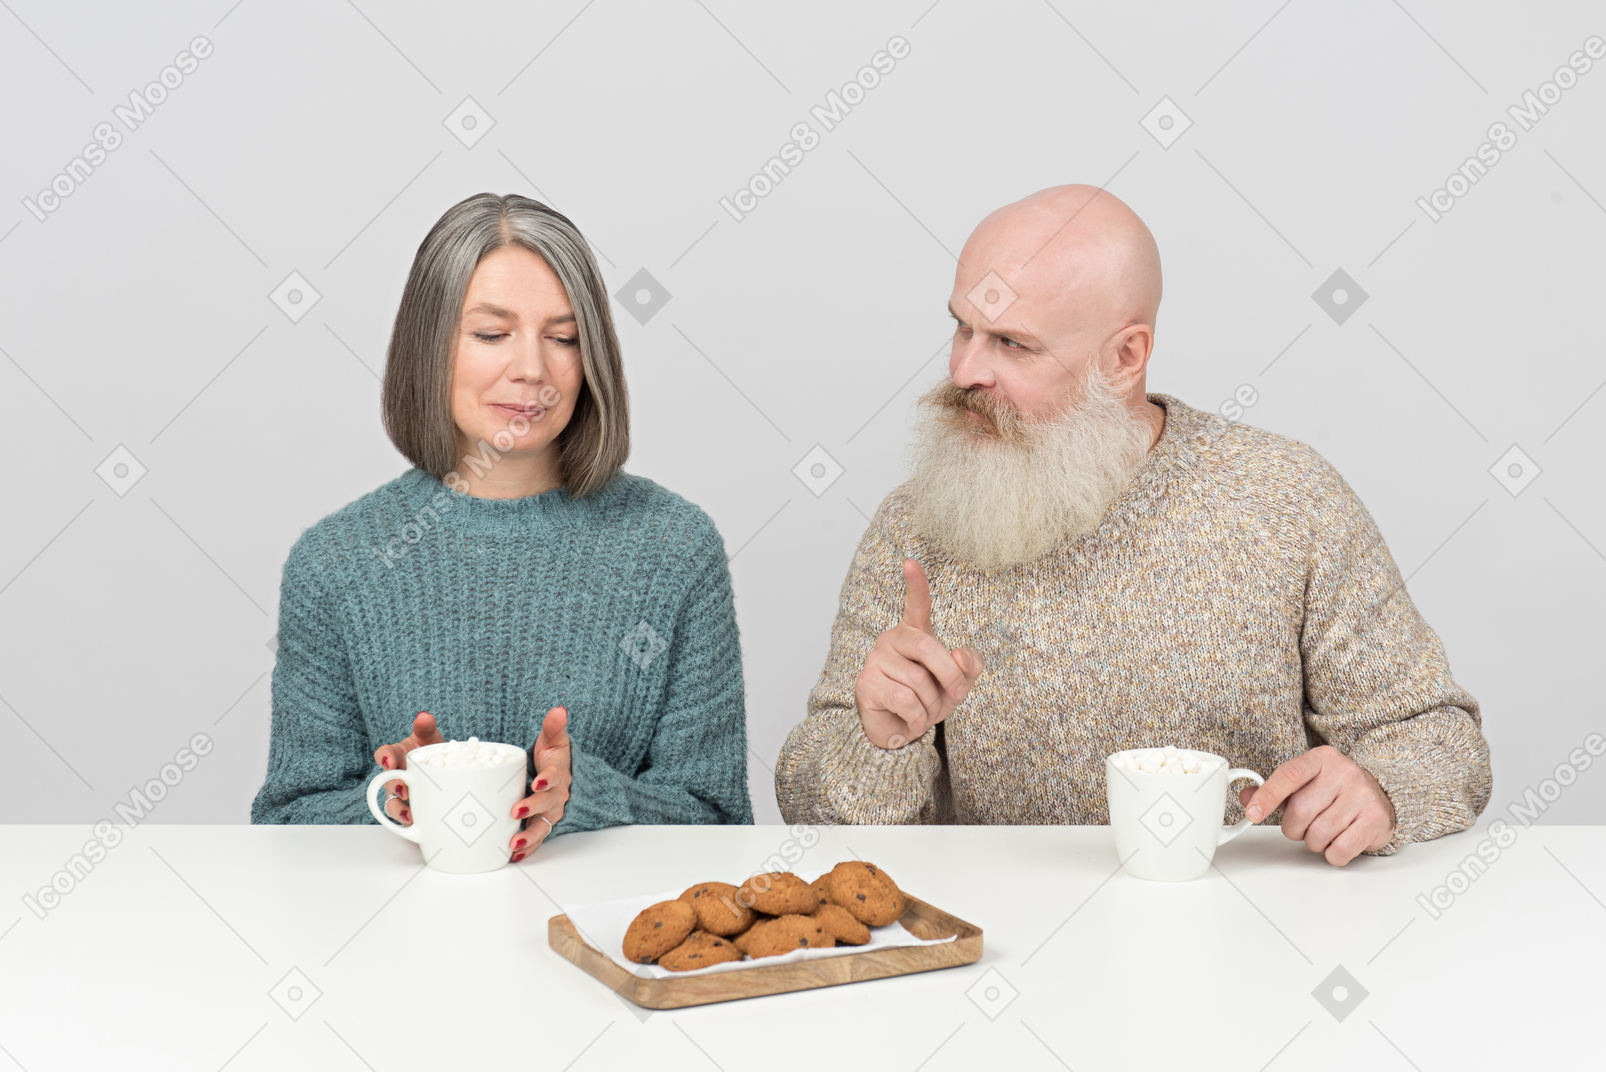 Aged man pointing out something to his wife